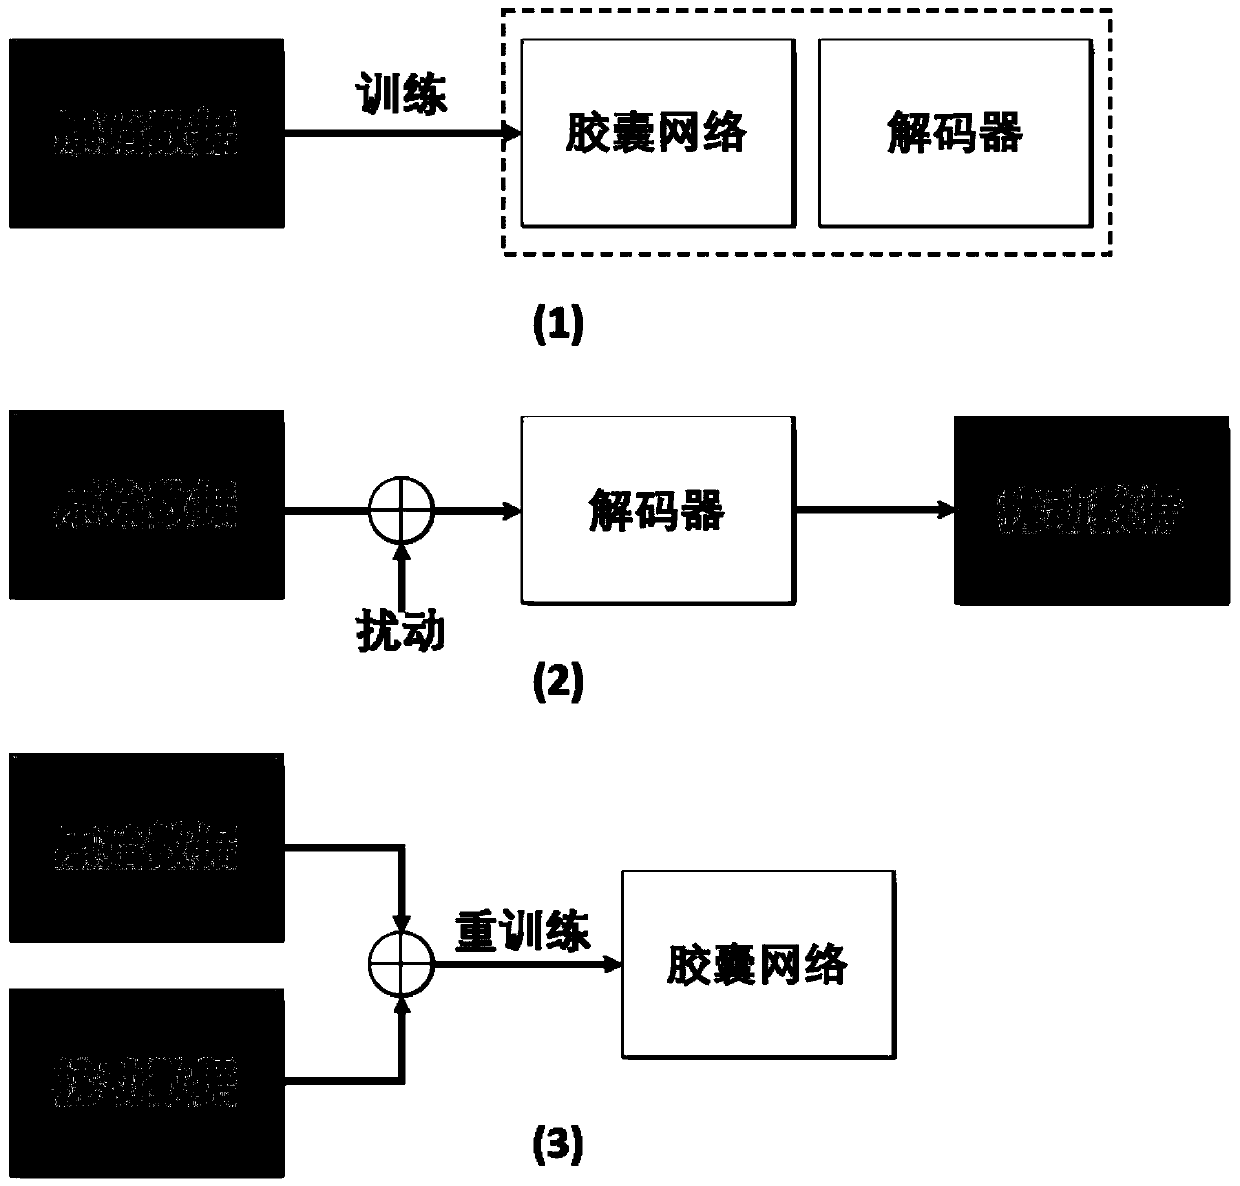 Electric power communication network equipment reliability evaluation method based on capsule network